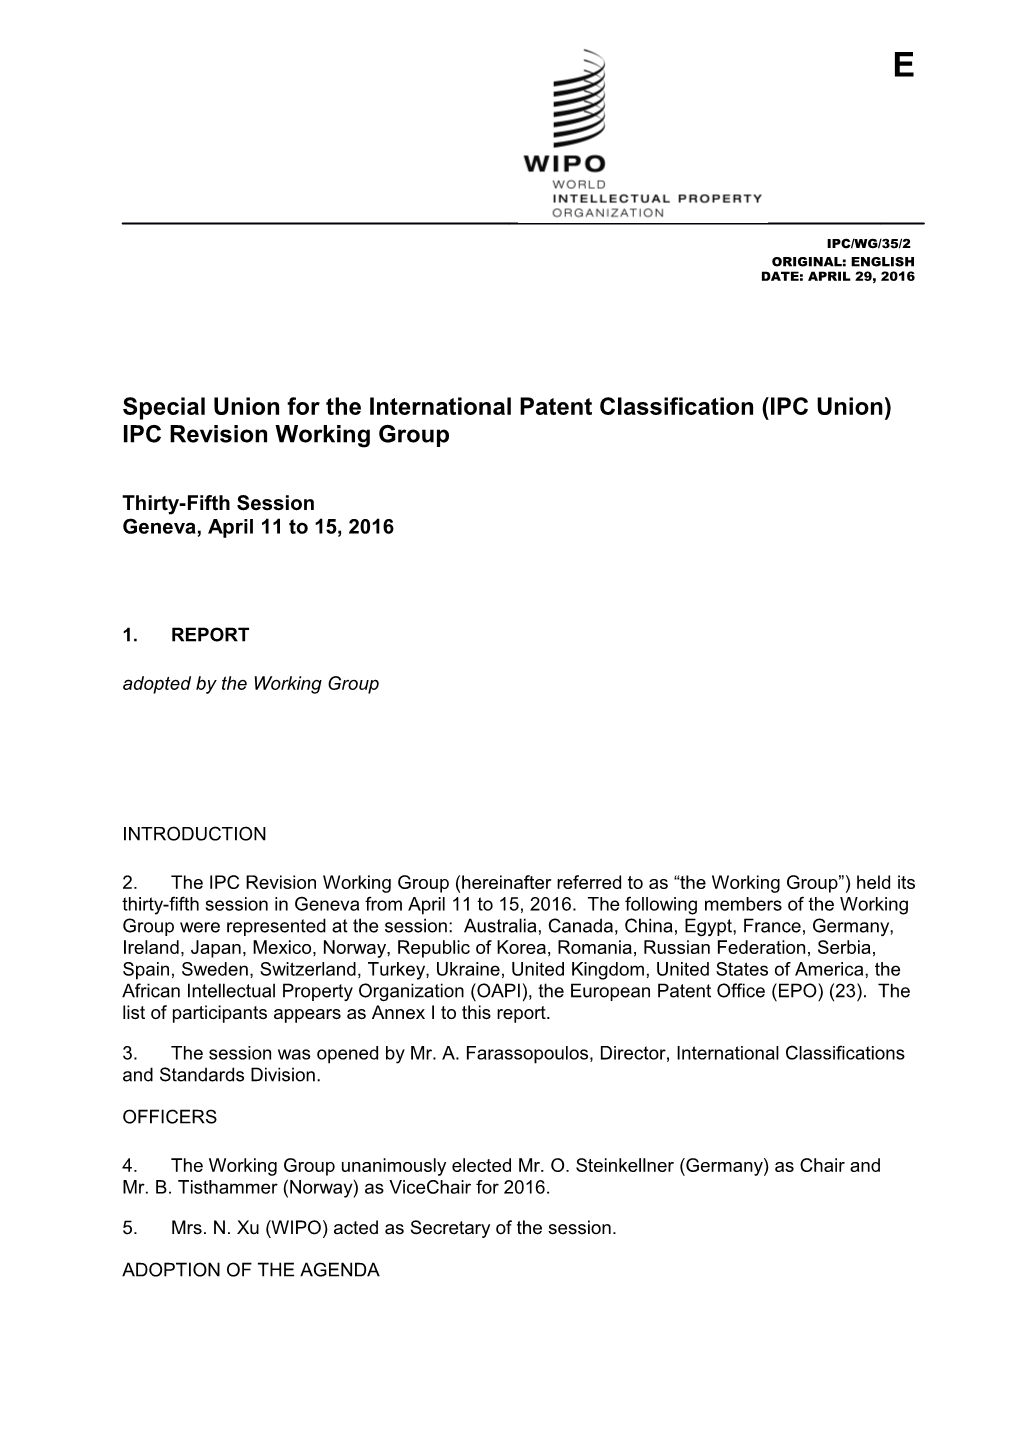 IPC/WG/35/2 - Report of the 35Th Session of the IPC Revision Working Group